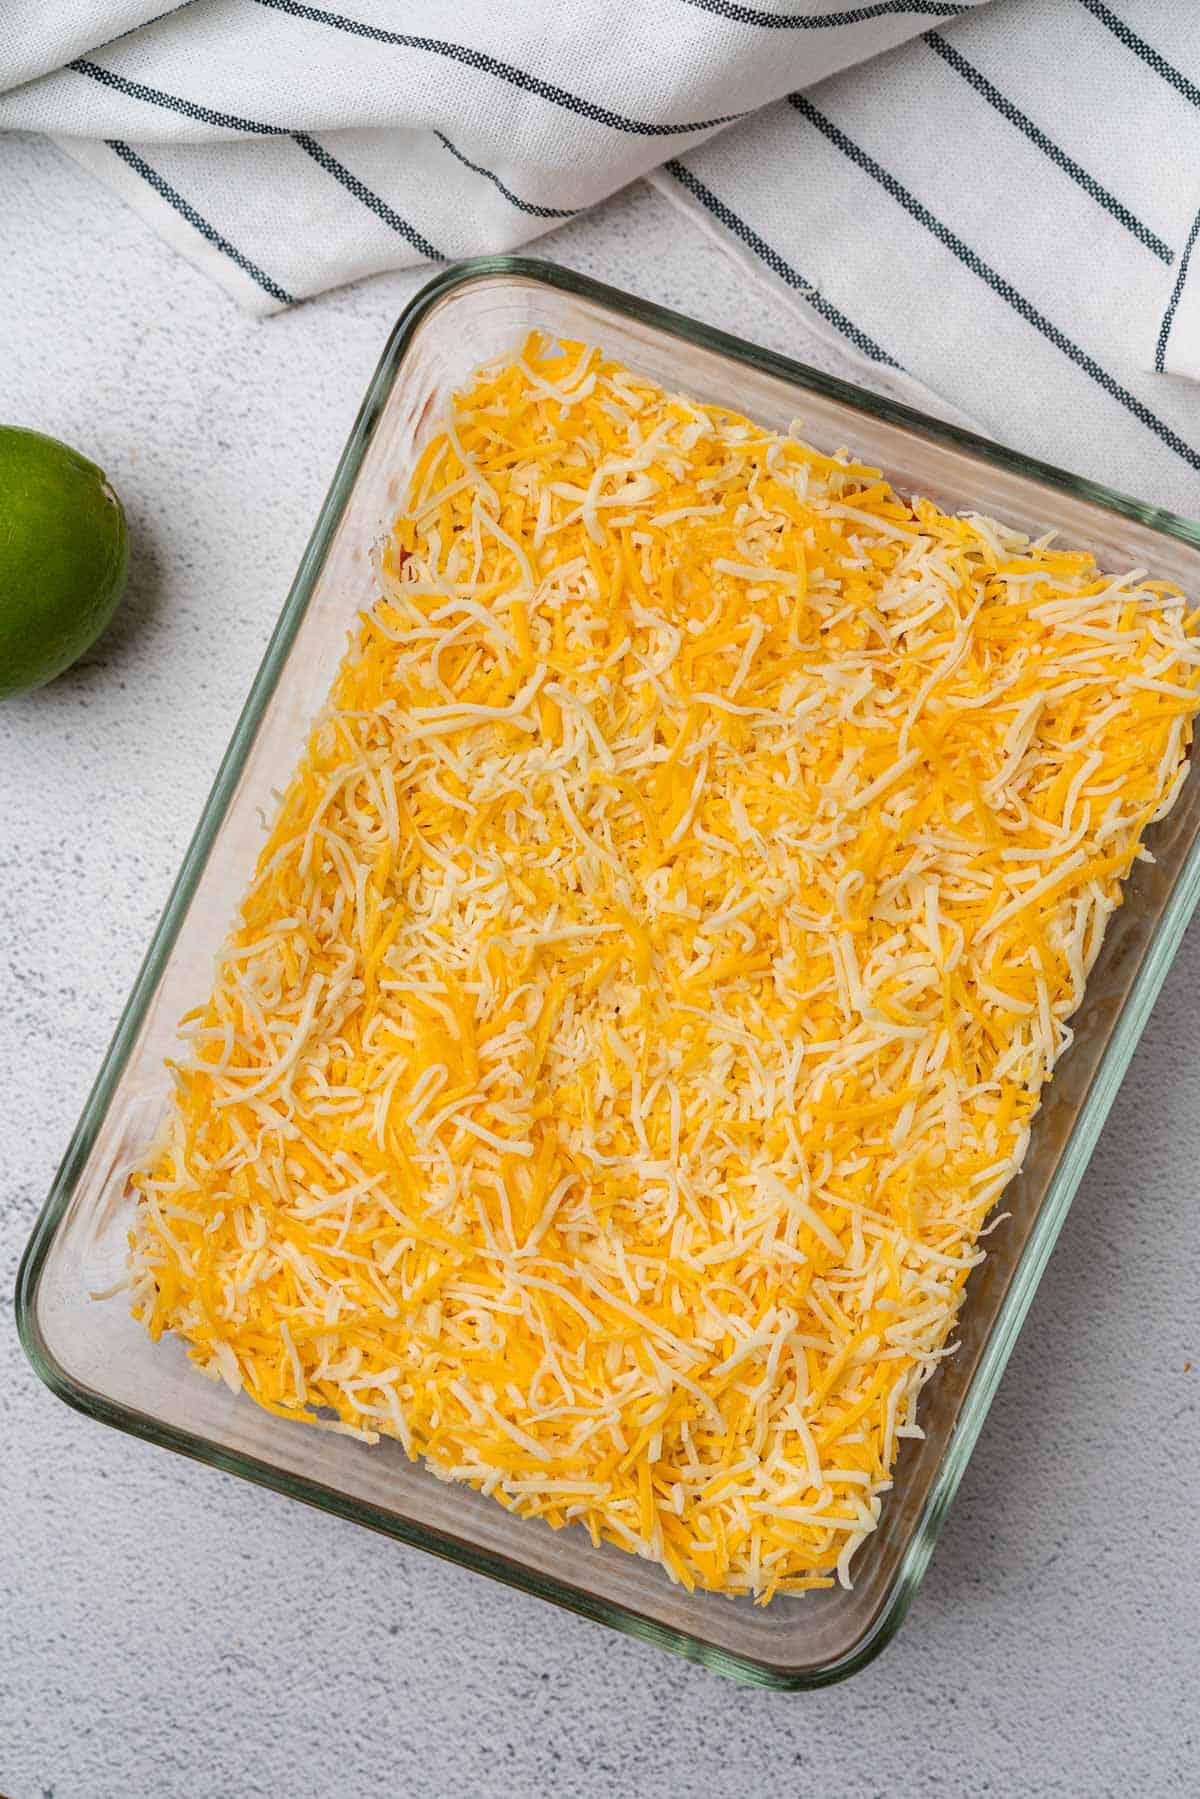 shredded cheese in a glass casserole dish with limes